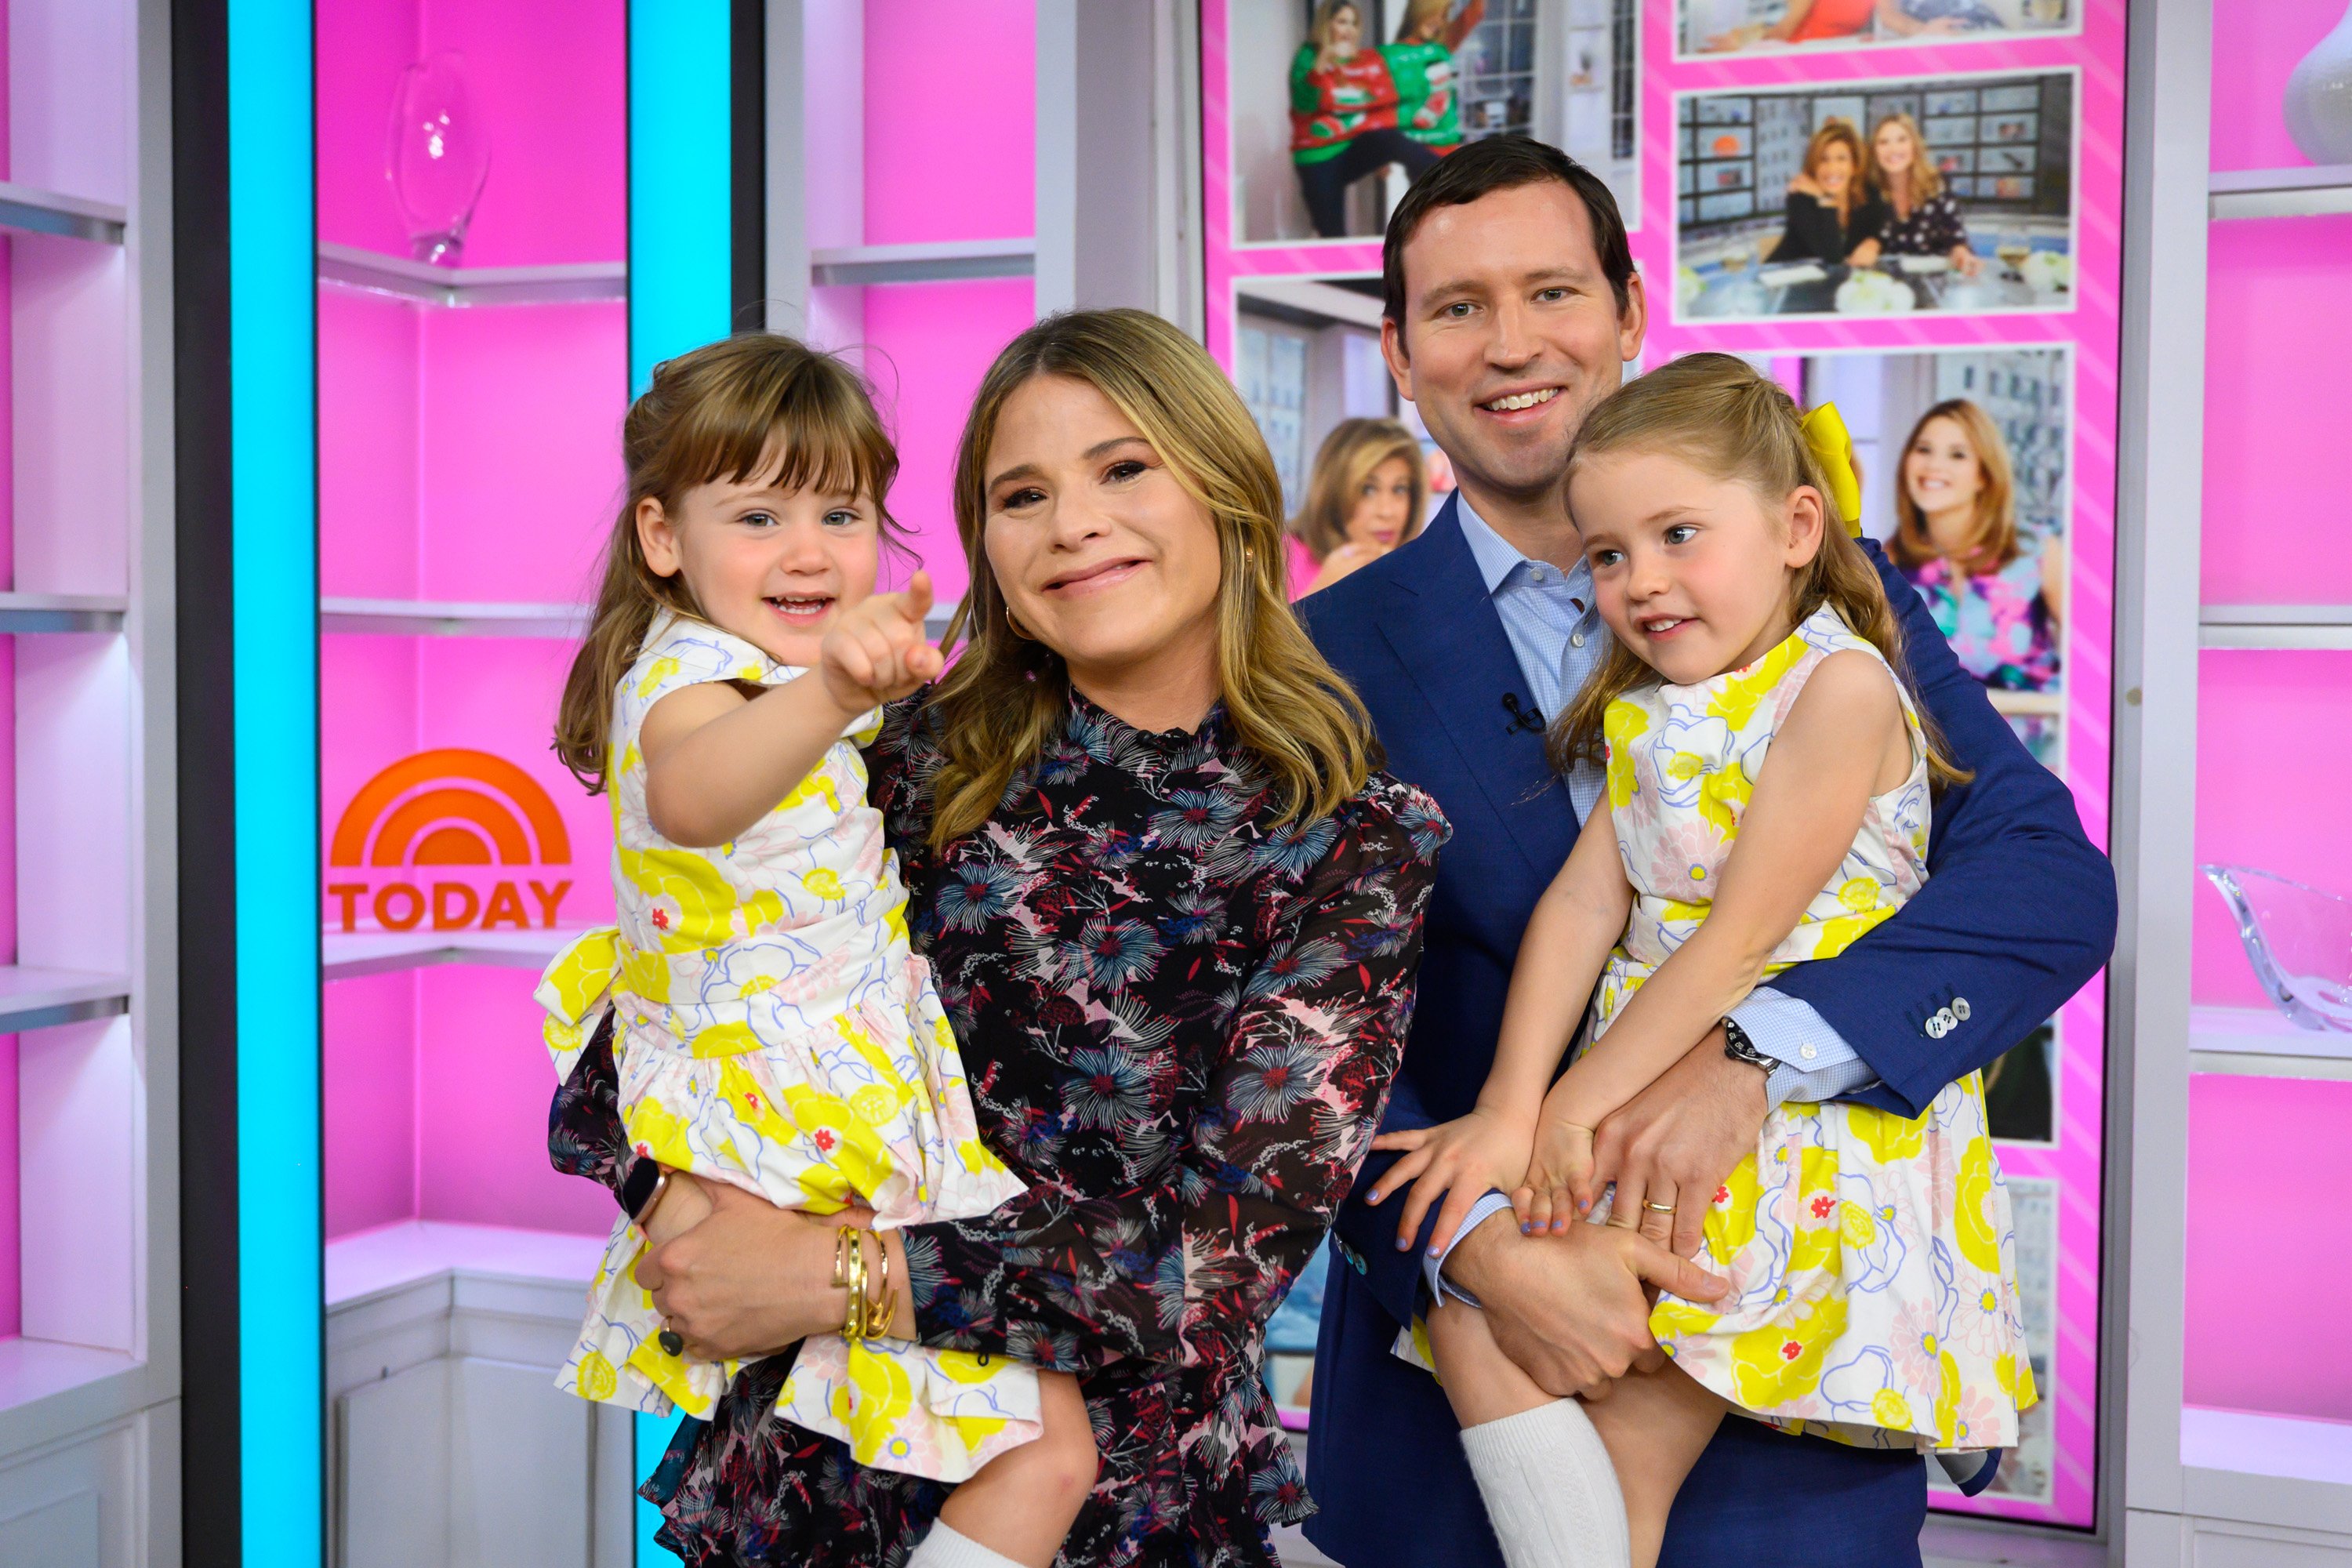 Jenna Bush Hager and Henry Hager with their daughters Mila and Poppy on Monday, April 8, 2019 | Source: Getty Images